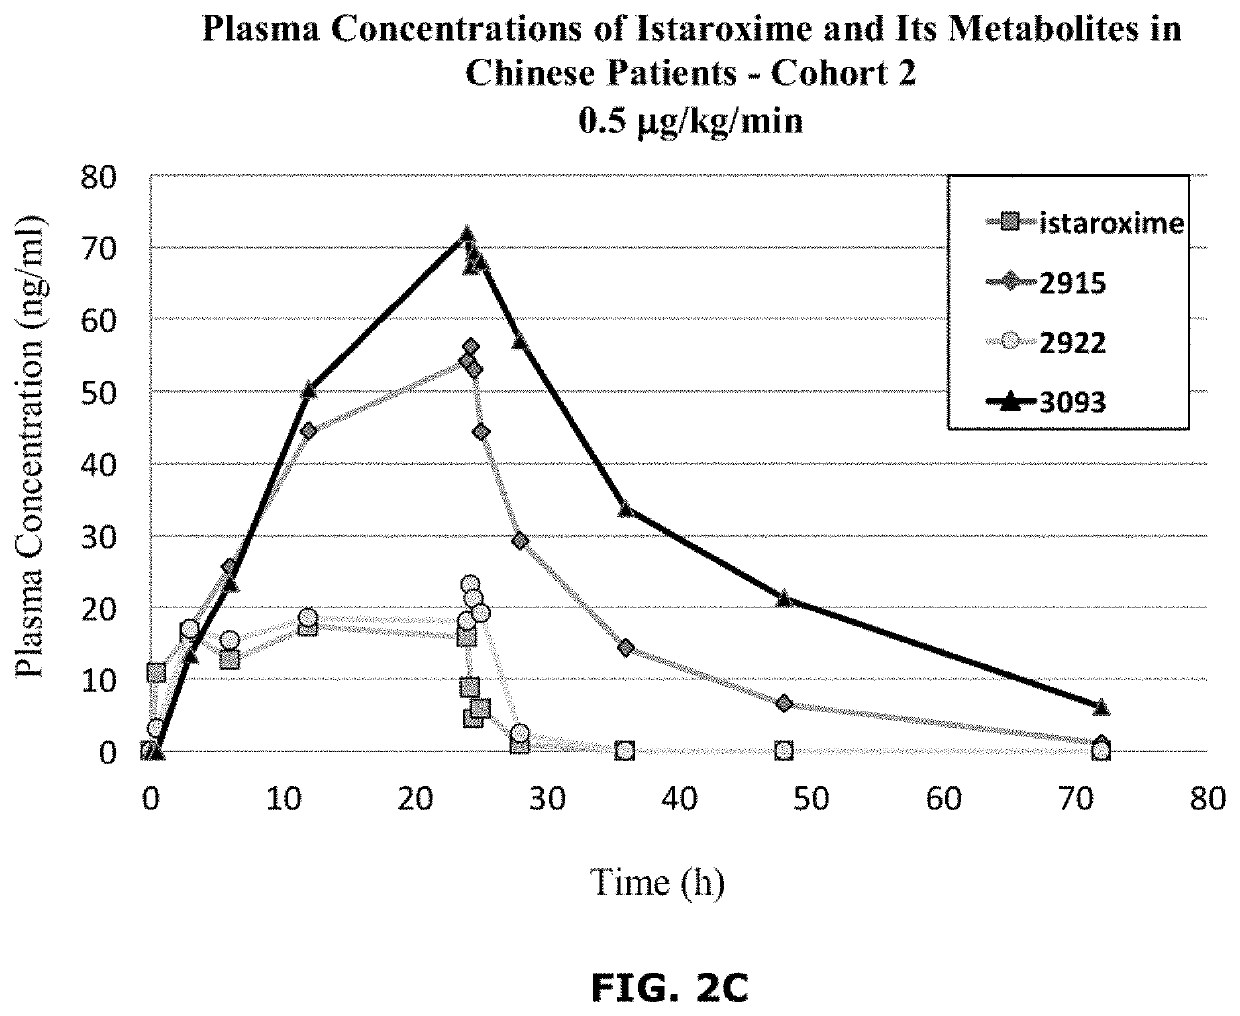 Istaroxime-containing intravenous formulation for the treatment of acute heart failure (AHF)